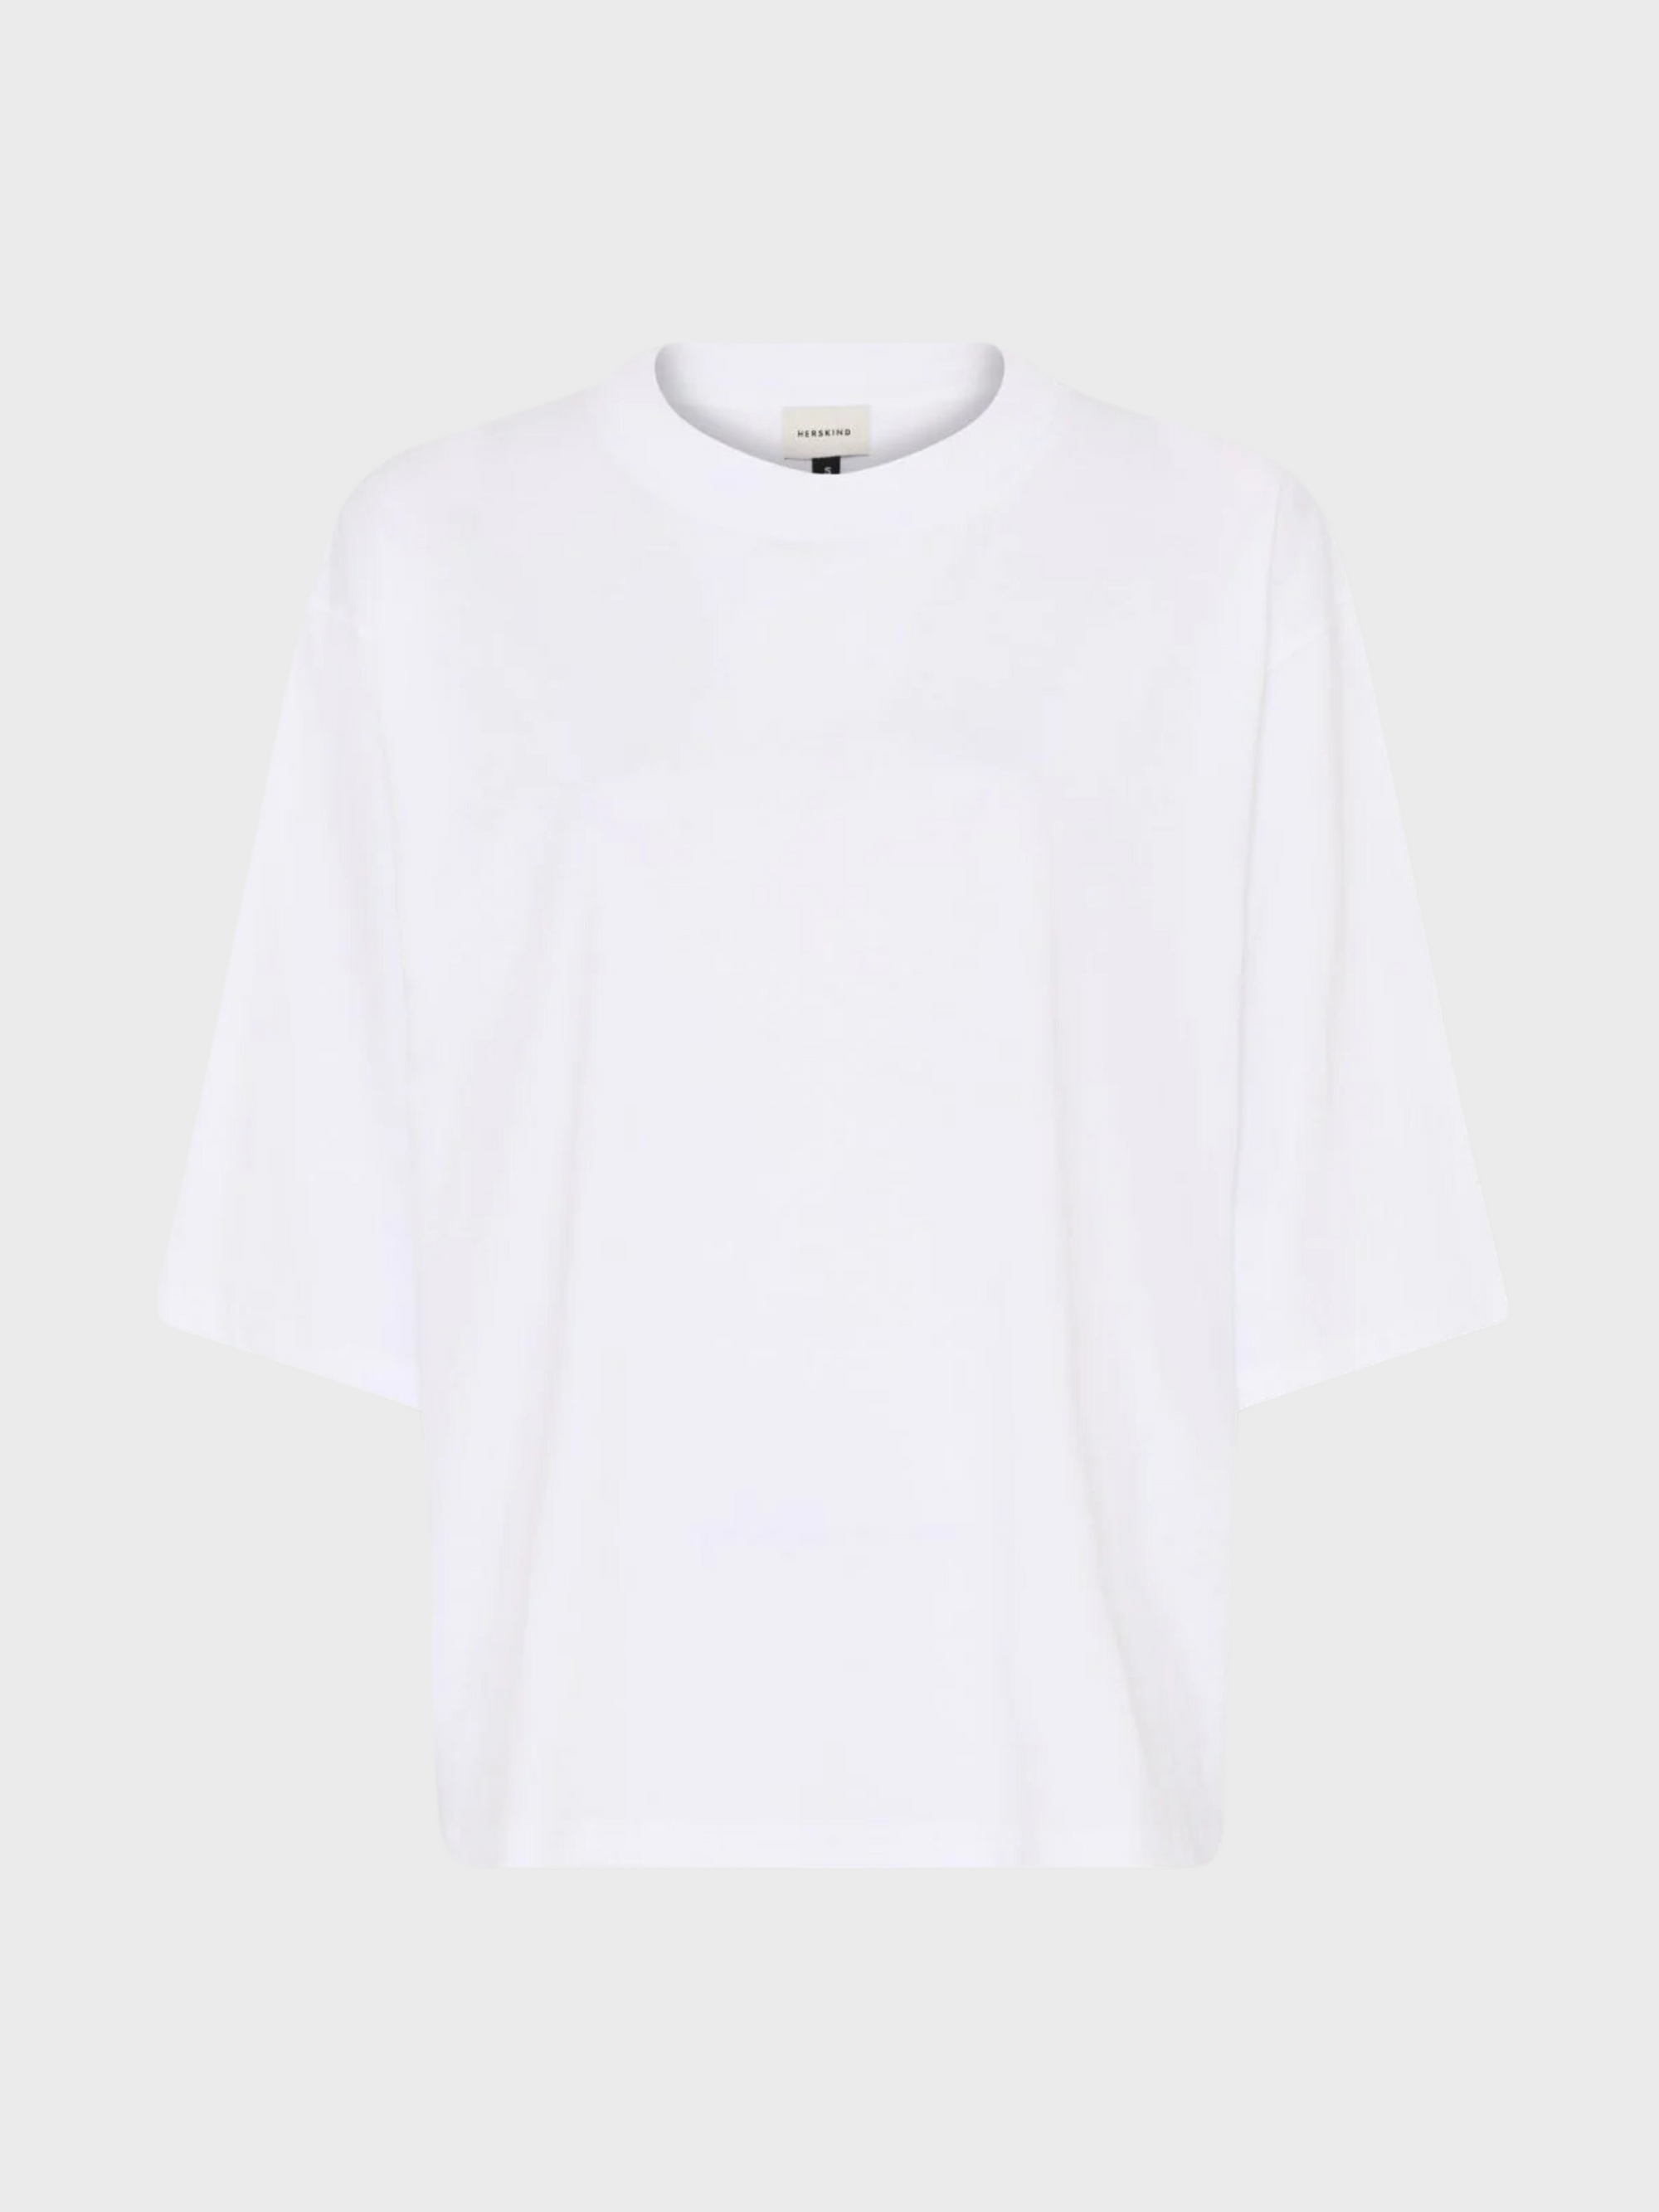 Herskind Larsson T-Shirt White-T-Shirts-West of Woodward Boutique-Vancouver-Canada